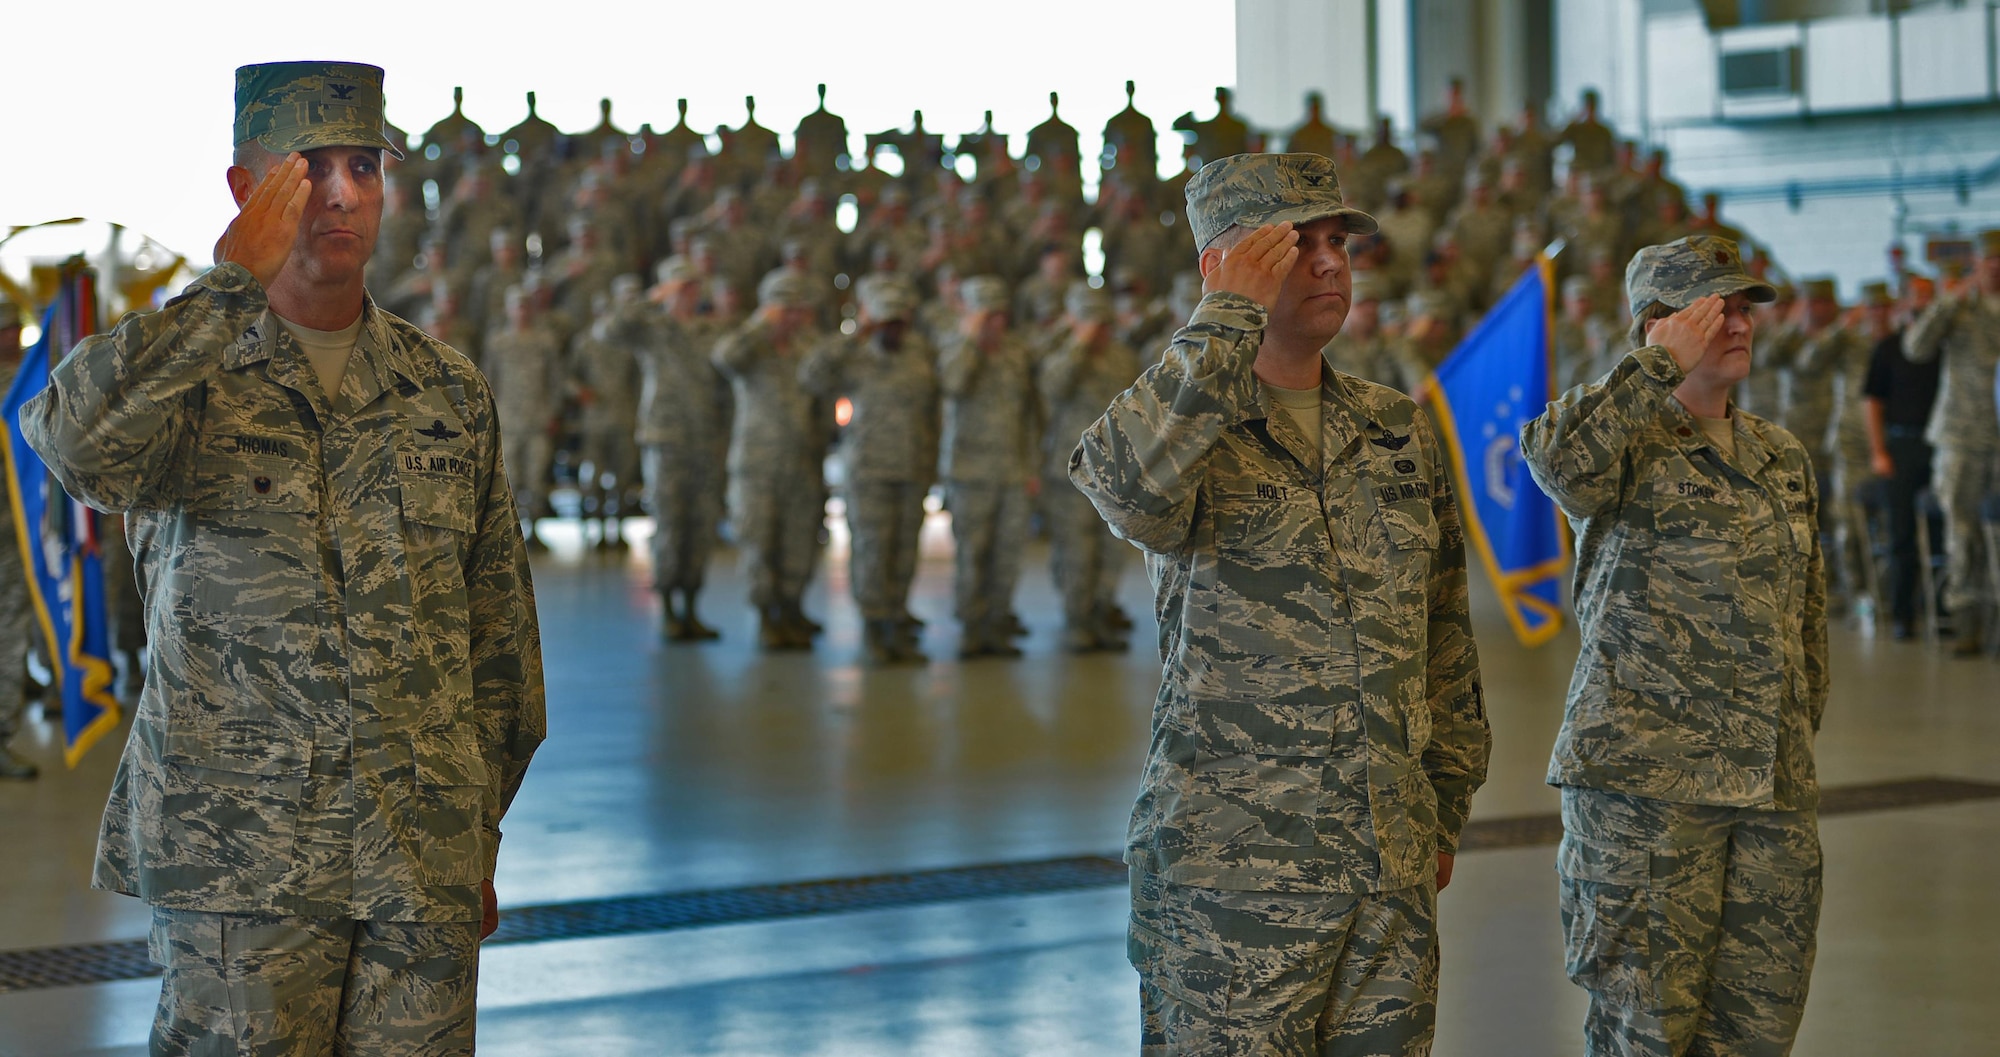 Col. Anthony Thomas, Air Force Special Operations Command director of cyber and command, control, communications and computer systems; Col. William Holt, AFSOC director of operations; and Maj. Lisa Stokey, executive officer to the AFSOC vice commander, lead the formation of Air Commandos at the change of command ceremony, July 19, 2016, held in Freedom Hangar.  (U.S. Air Force photo by Staff Sgt. Melanie Holochwost)